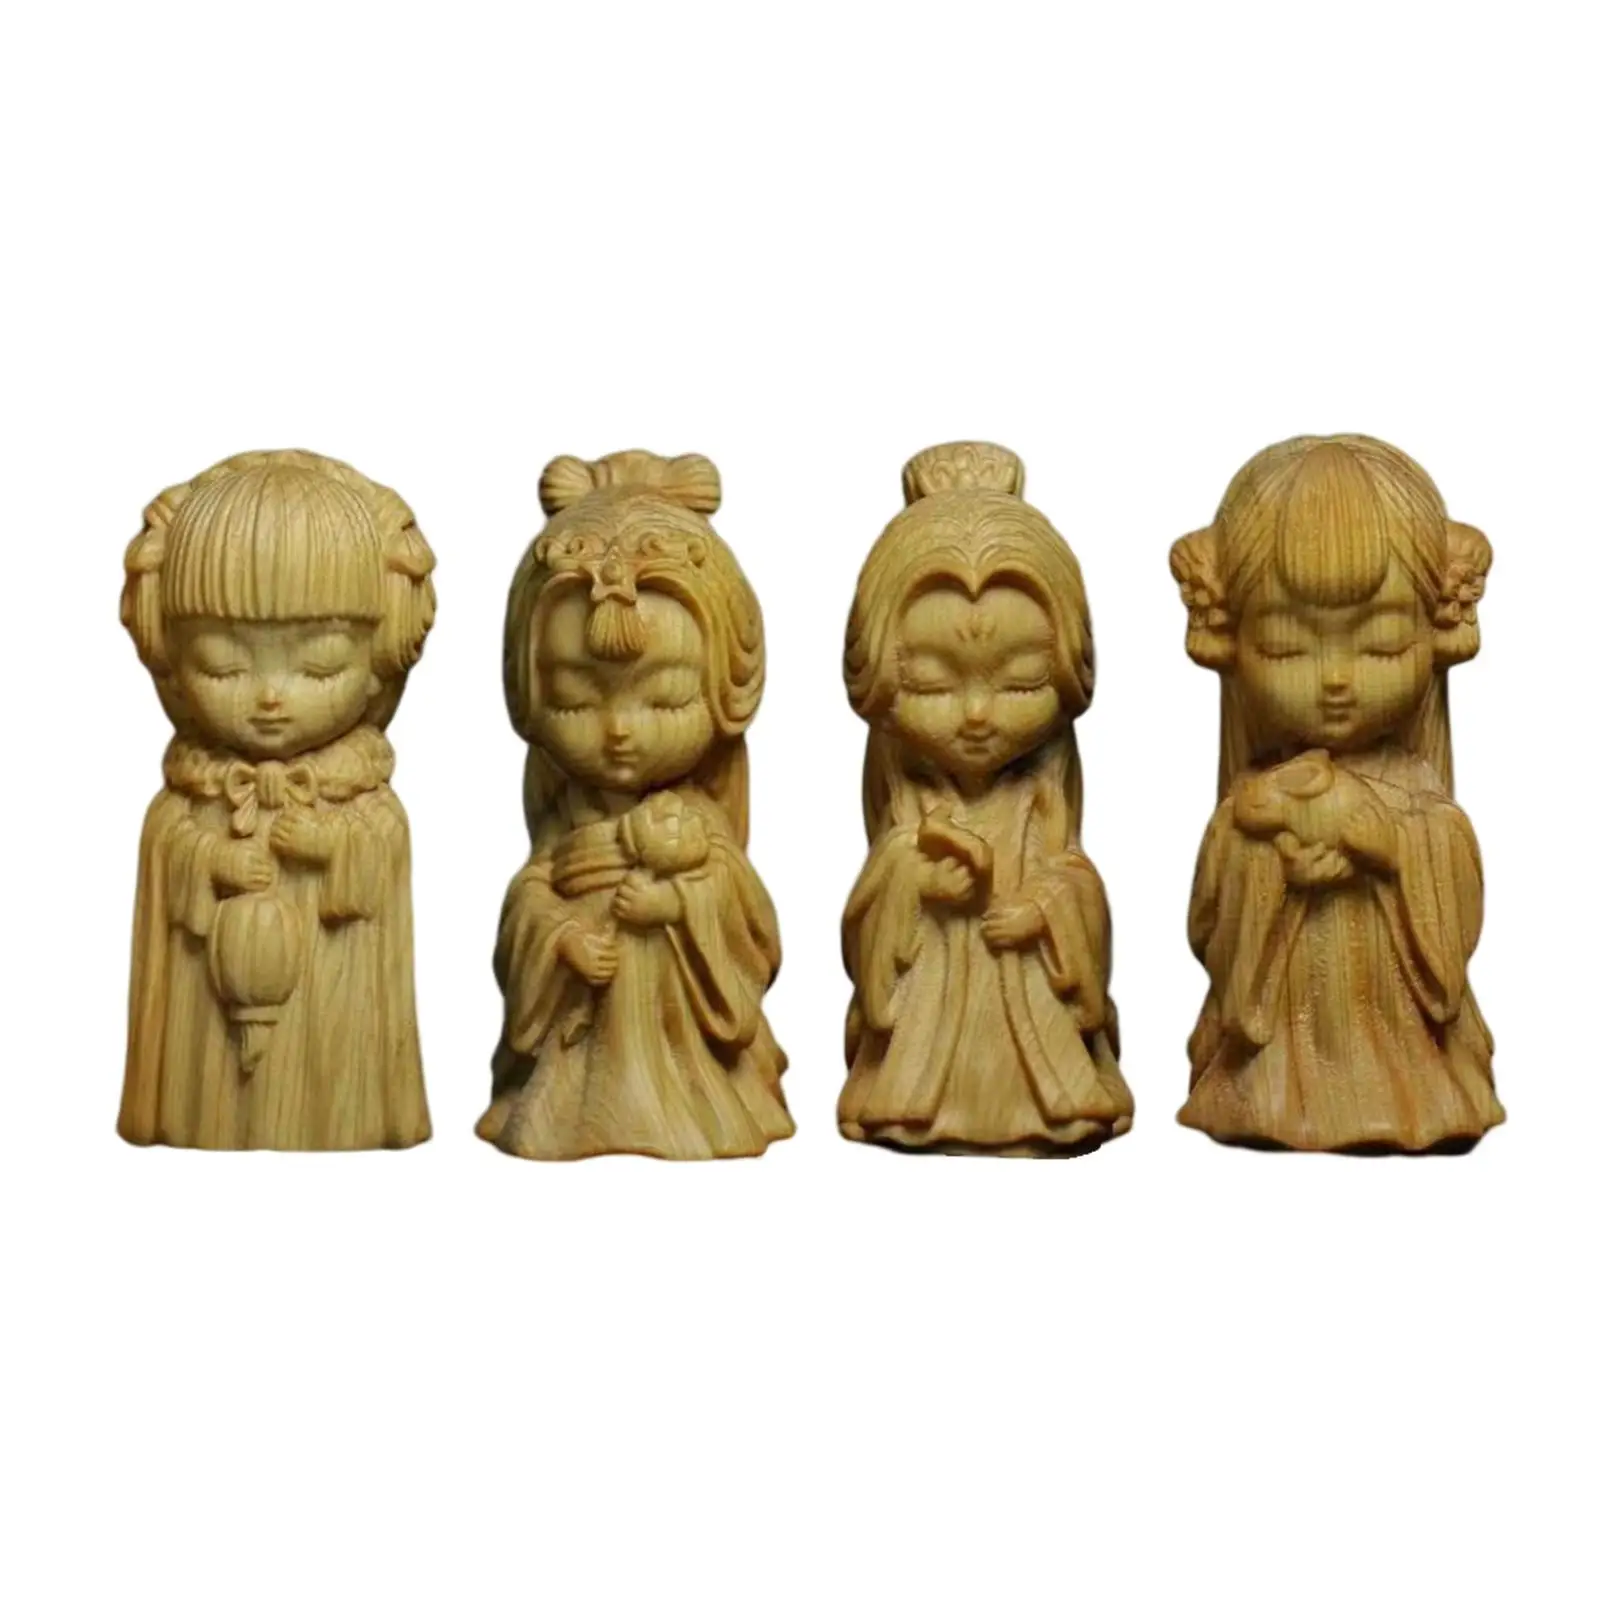 Cute Four Beauties Ornament Crafts Ornament Hand Carved for Office Home Desk